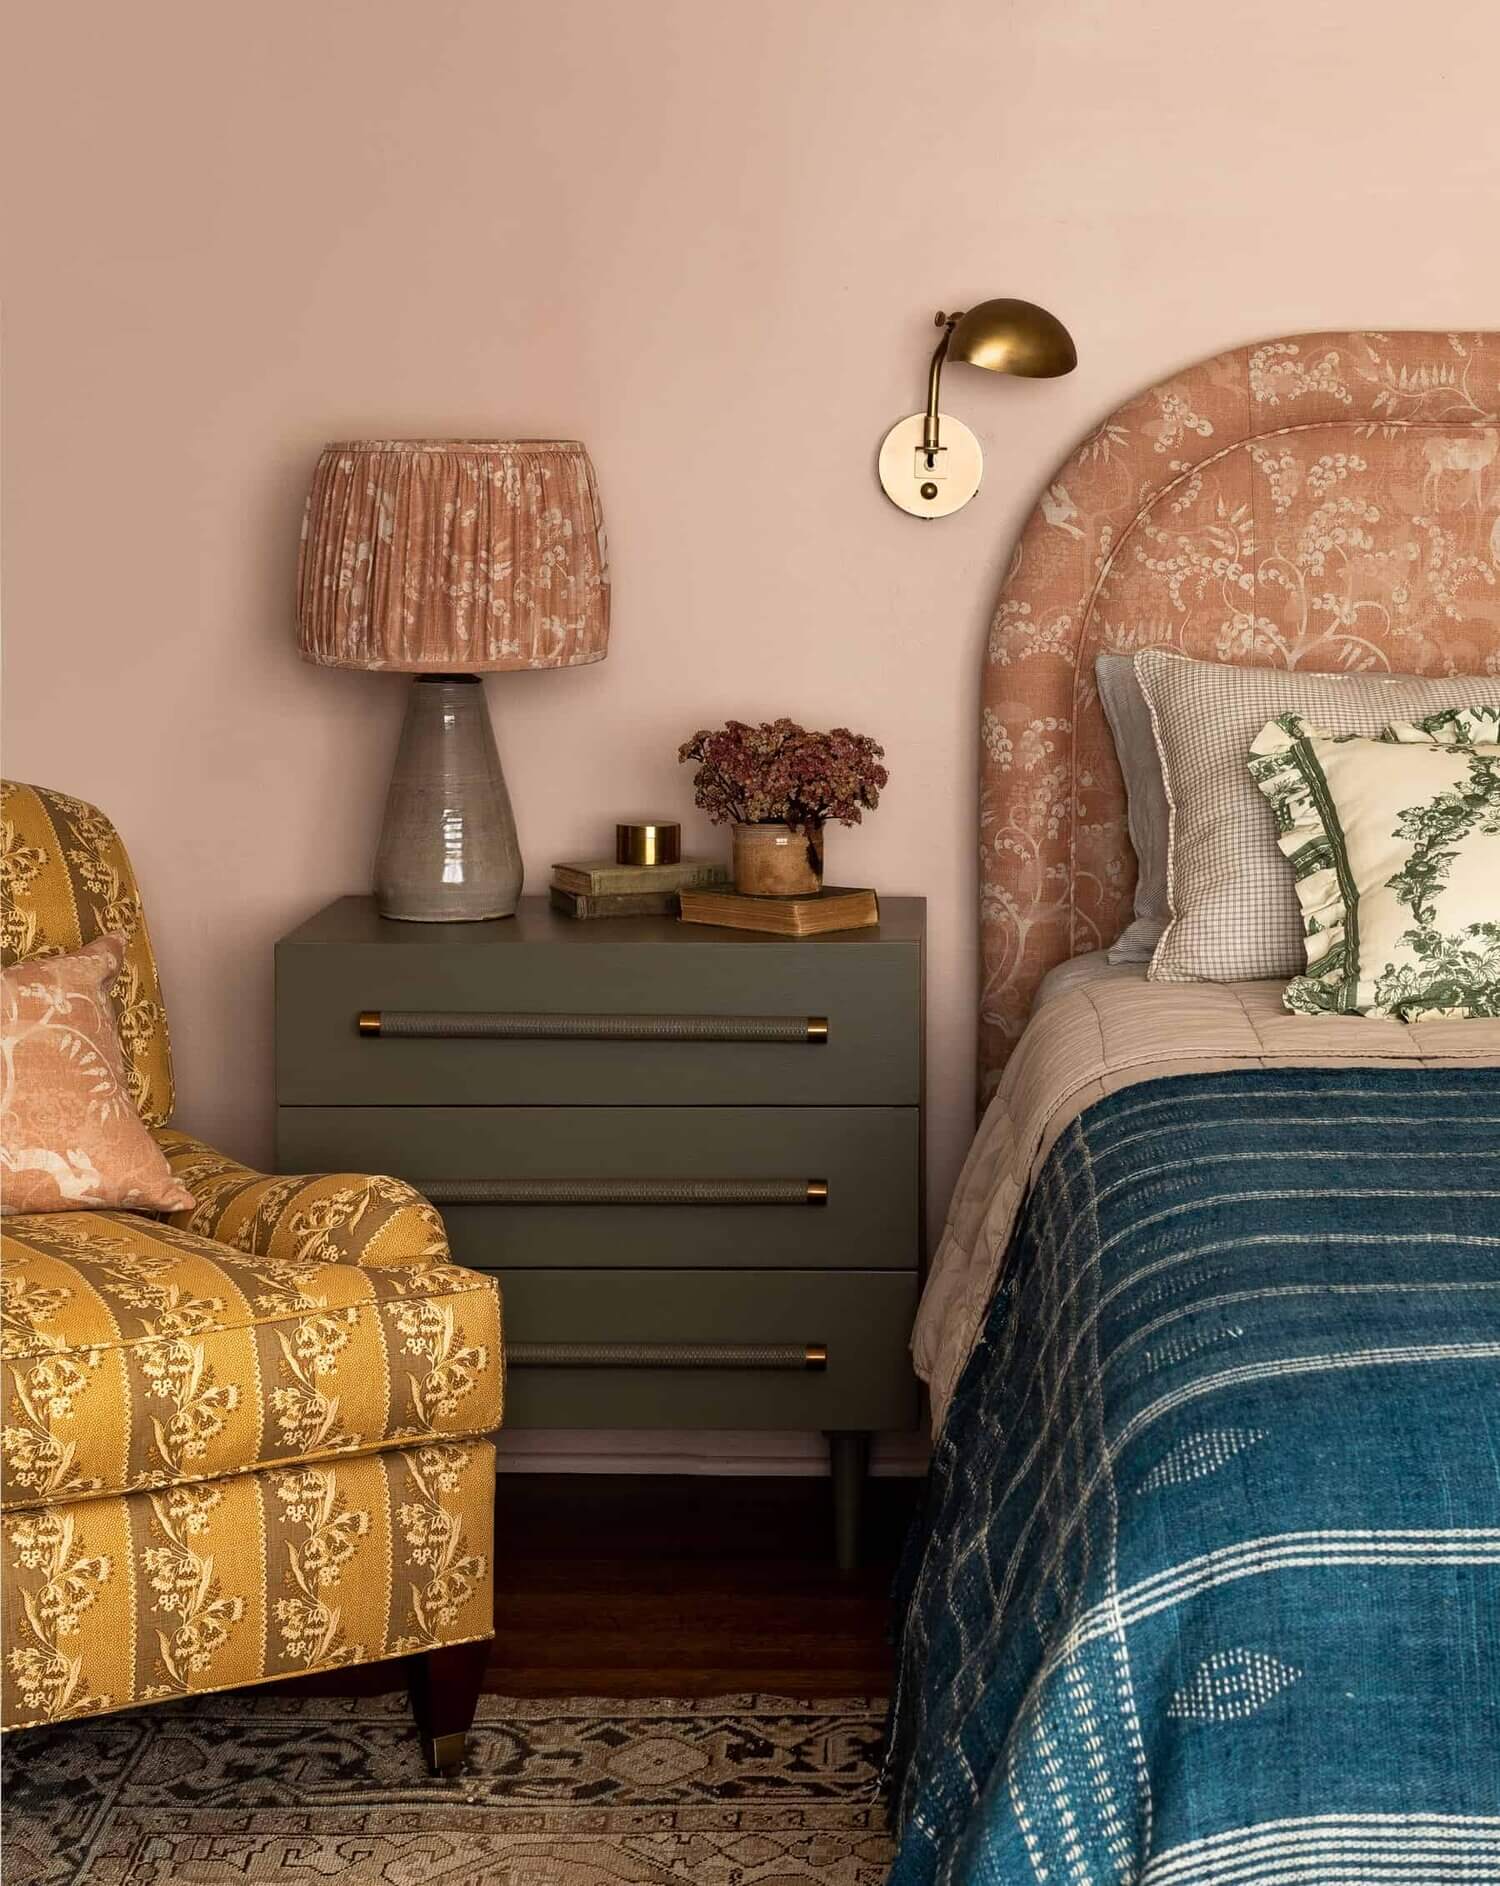 BlushpinkbedroomindesignerHeidiCailliersWashingtonhome TheNordroom1 Soothing Colors in Designer Heidi Caillier's Eclectic Washington Home